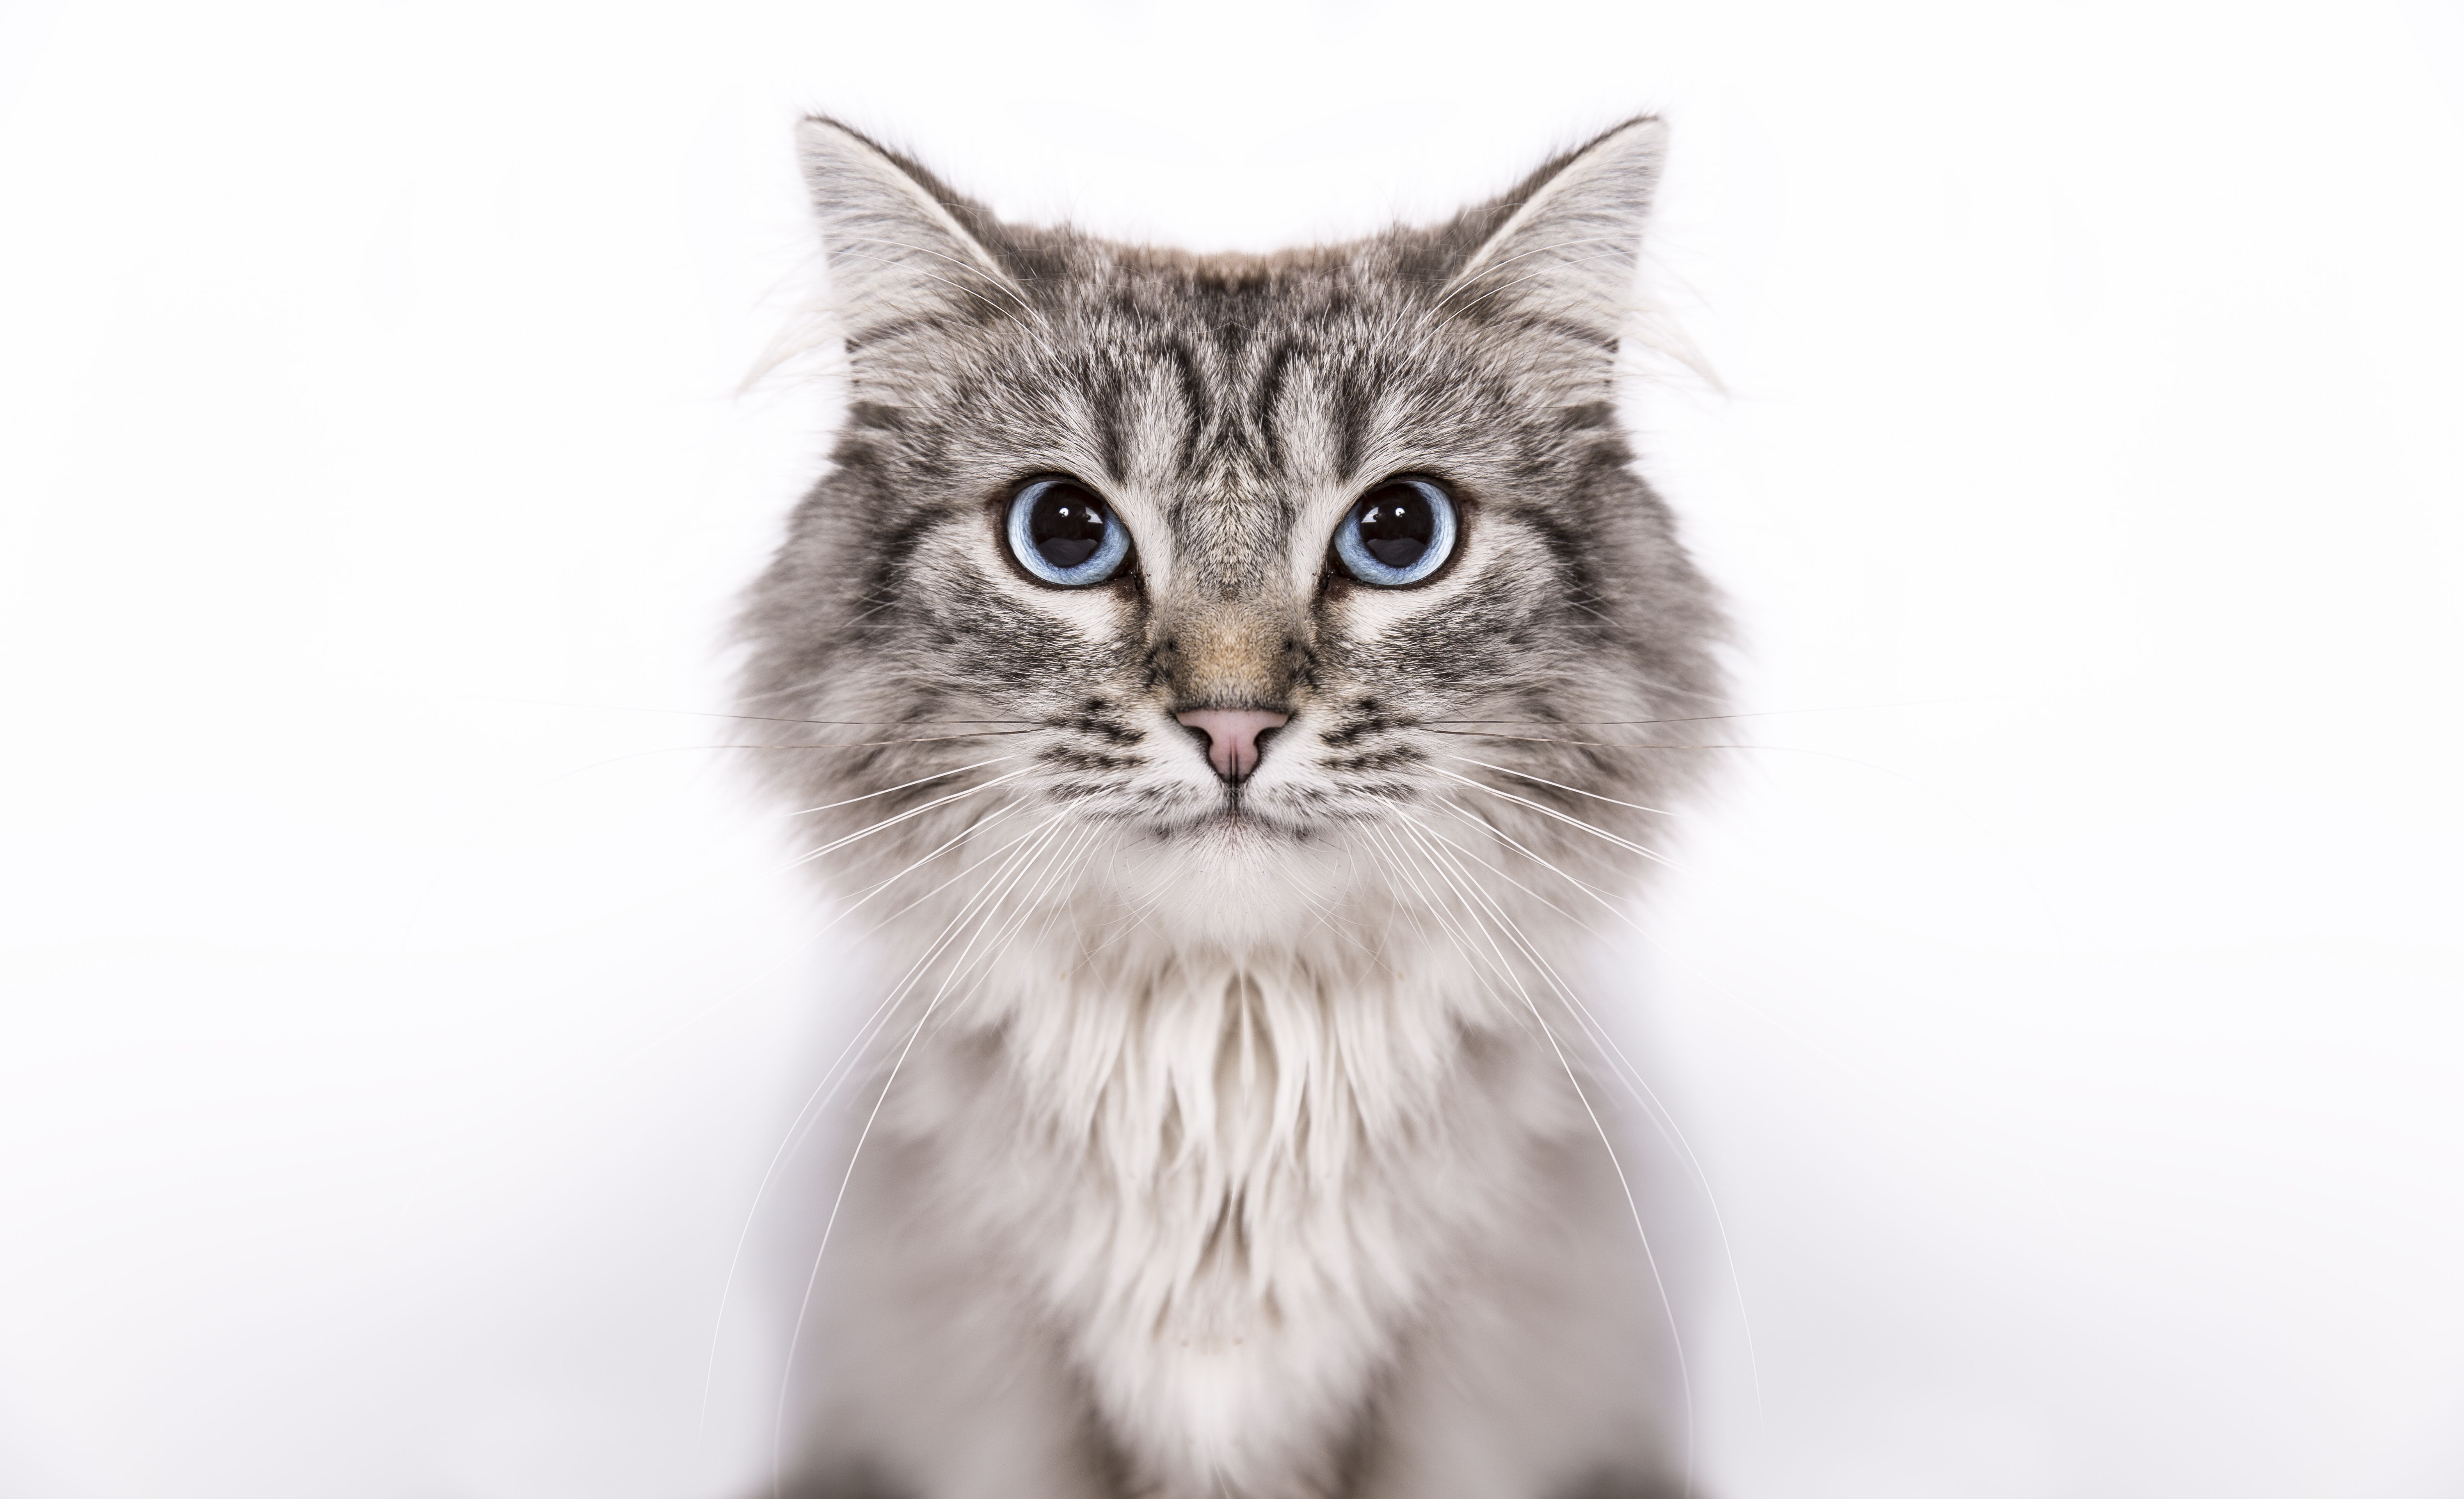 Cat Breeds: Top cat breeds with pictures and descriptions